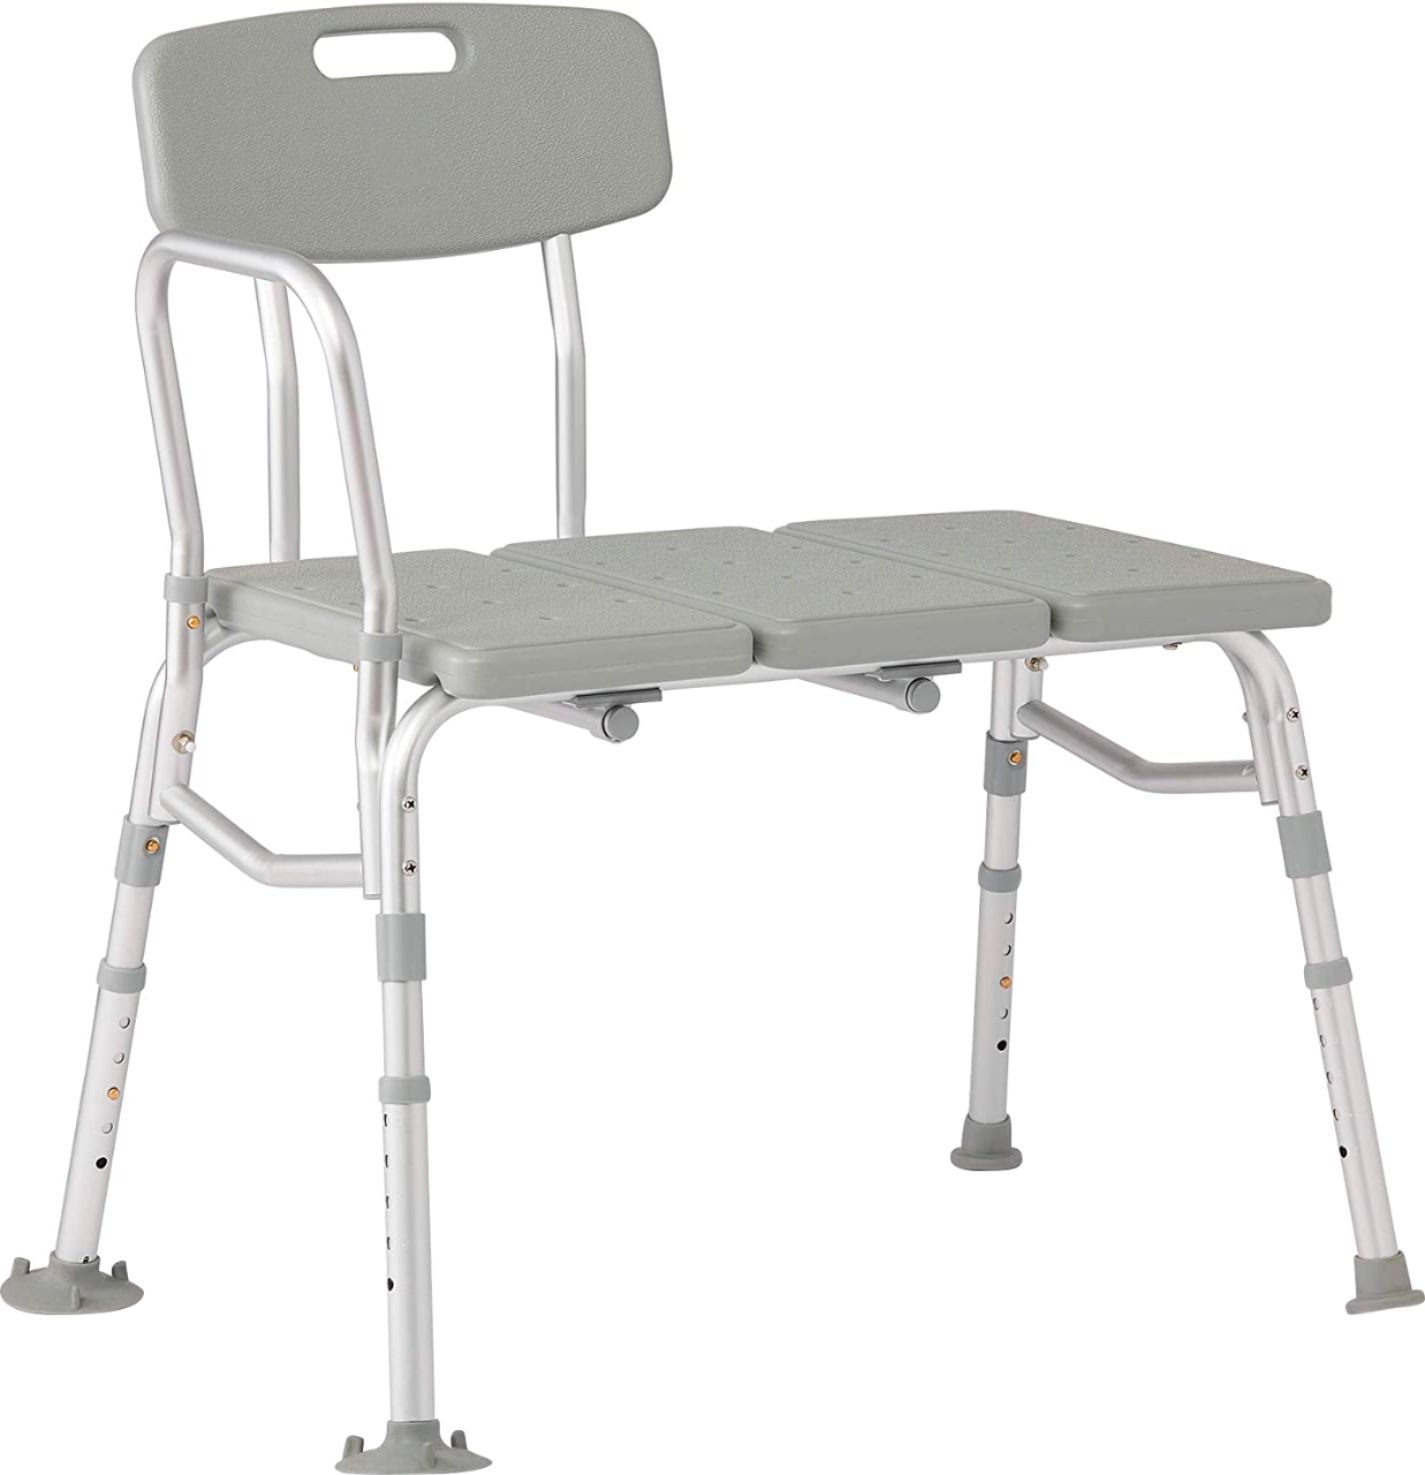 Medline Transfer Bench for Bathtub, for Use as a Bath or Shower Chair, Height Adjustable Legs, Non-Slip Feet, Gray - Gray